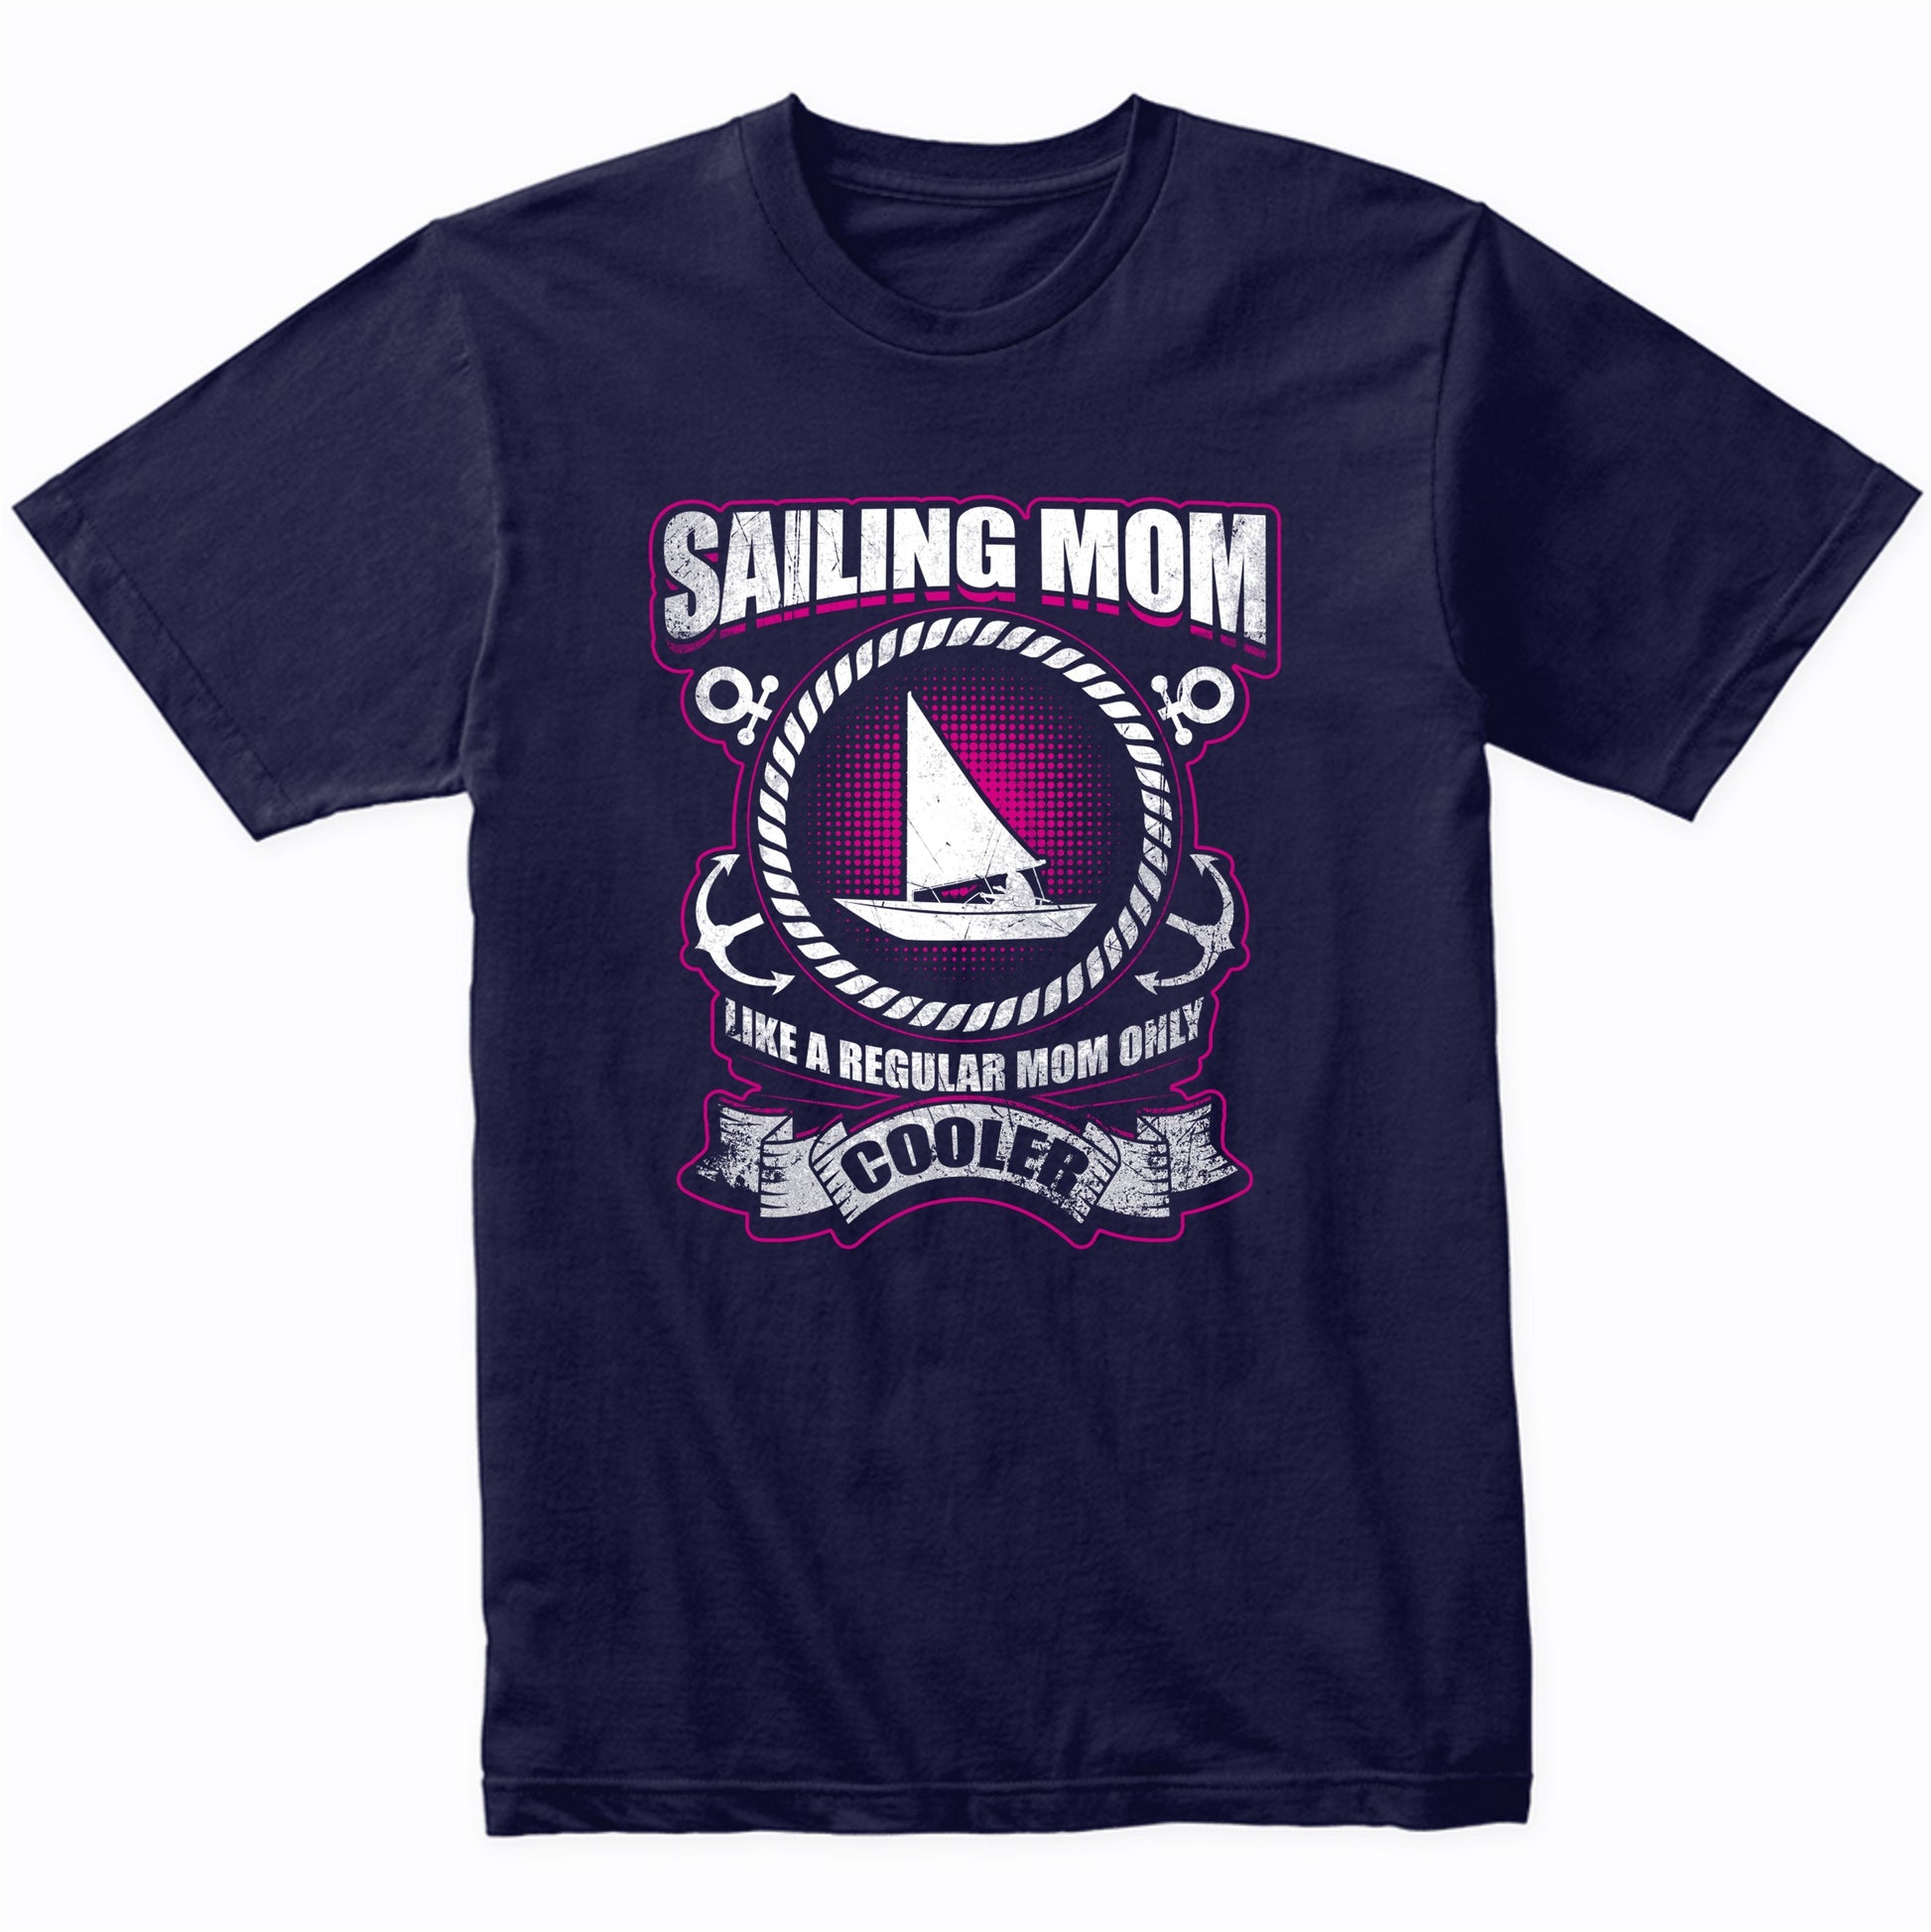 Sailing Mom Like A Regular Mom Only Cooler Funny T-Shirt